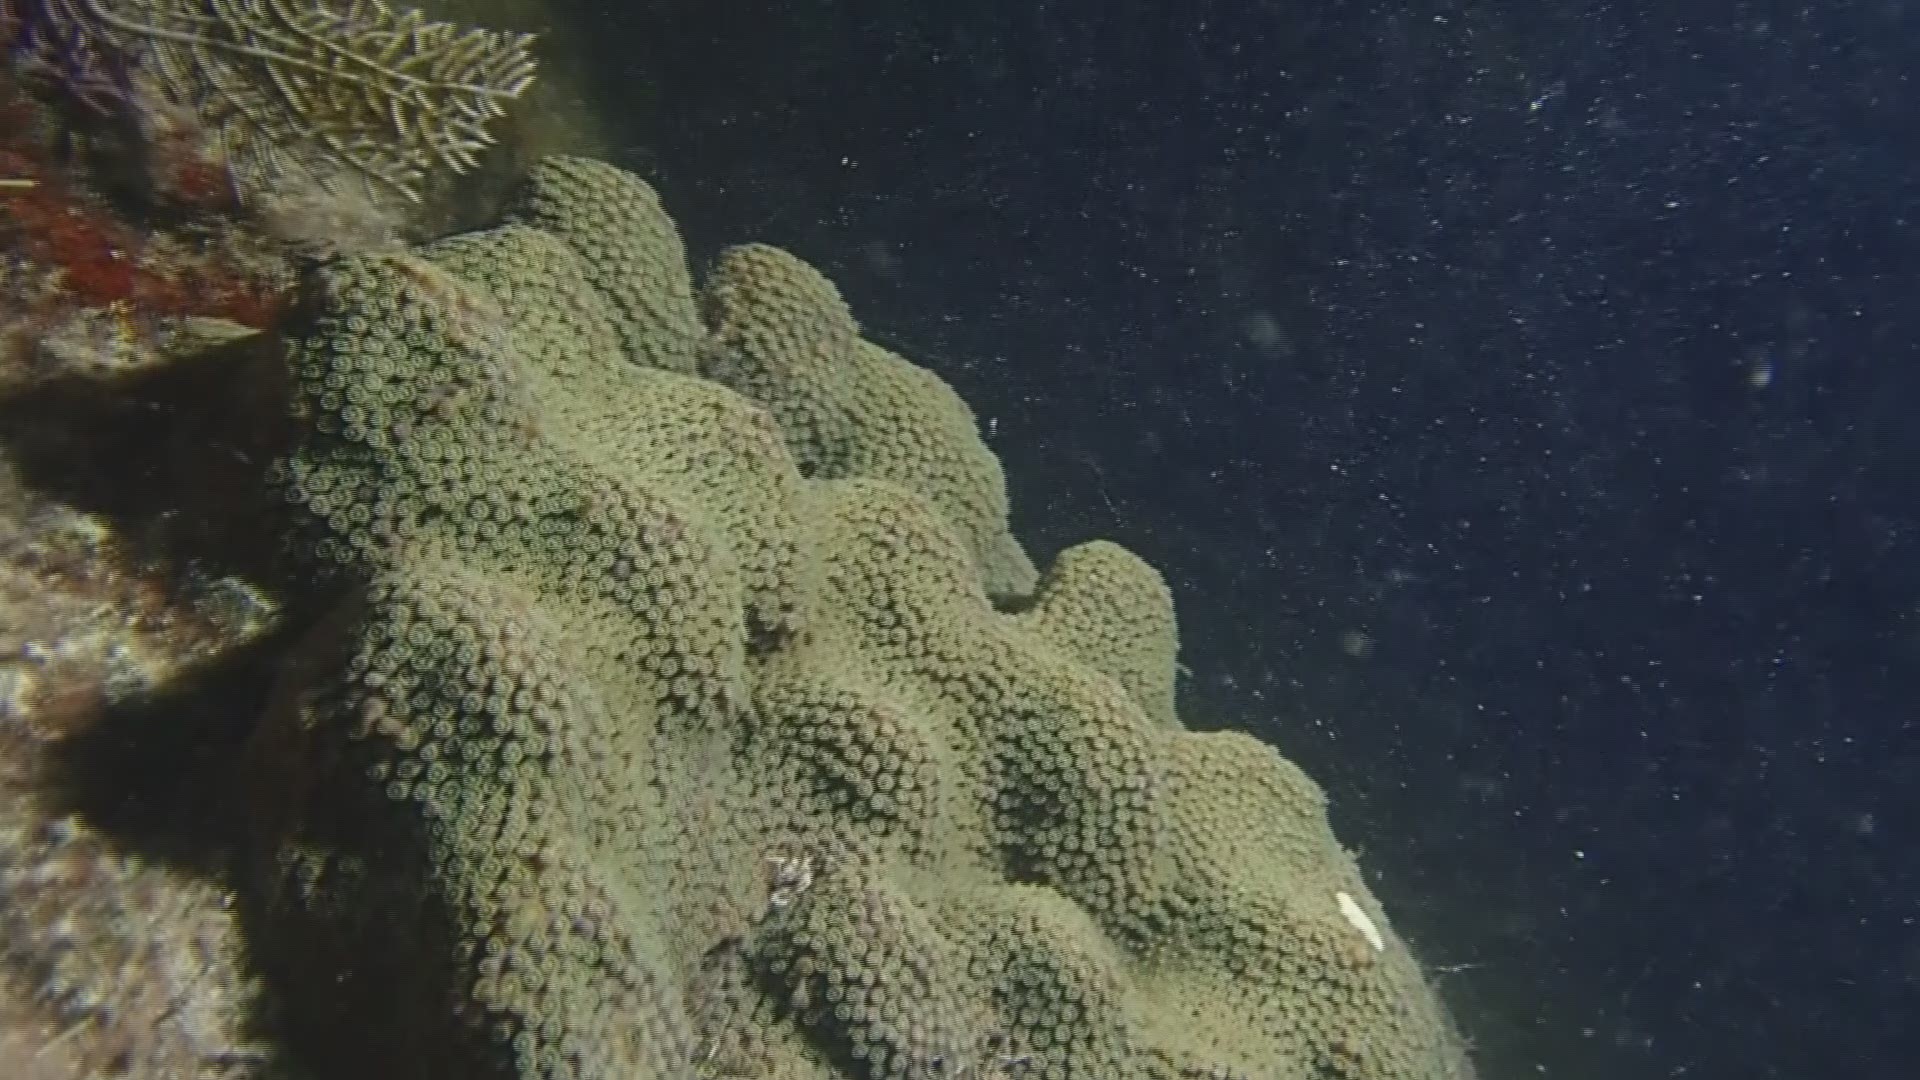 Scientists at MOTE saw coral spawn this week which is a rare sight. But we could see more coral reproducing in the future because of their scientific efforts.